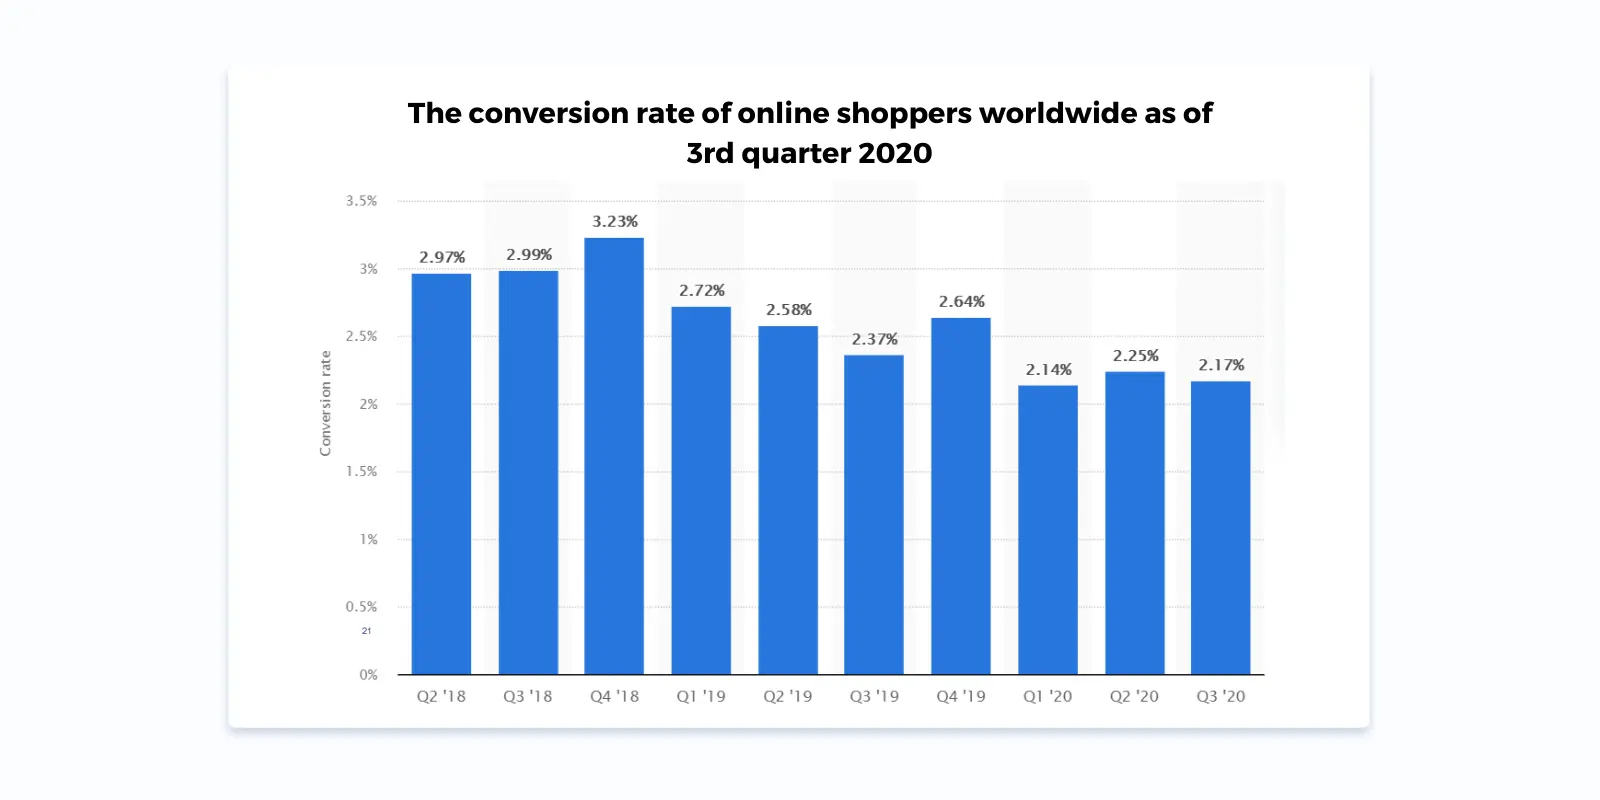 Conversion rate of online shoppers worldwide as of 3rd quarter 2020